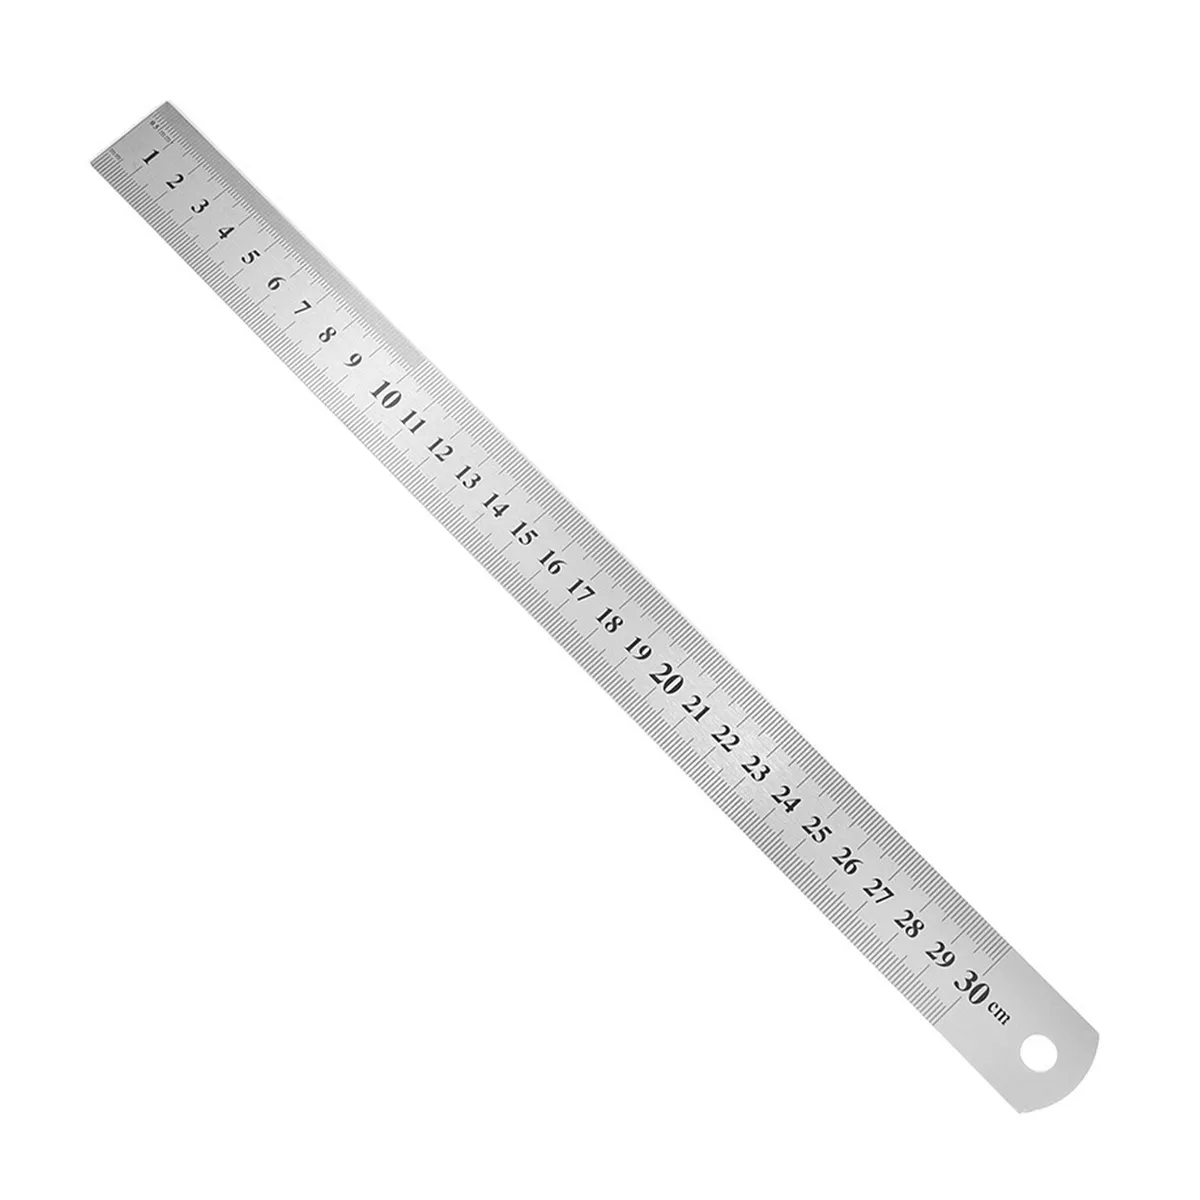 Stainless Steel Metal Rulers - China Supplier Wholesale